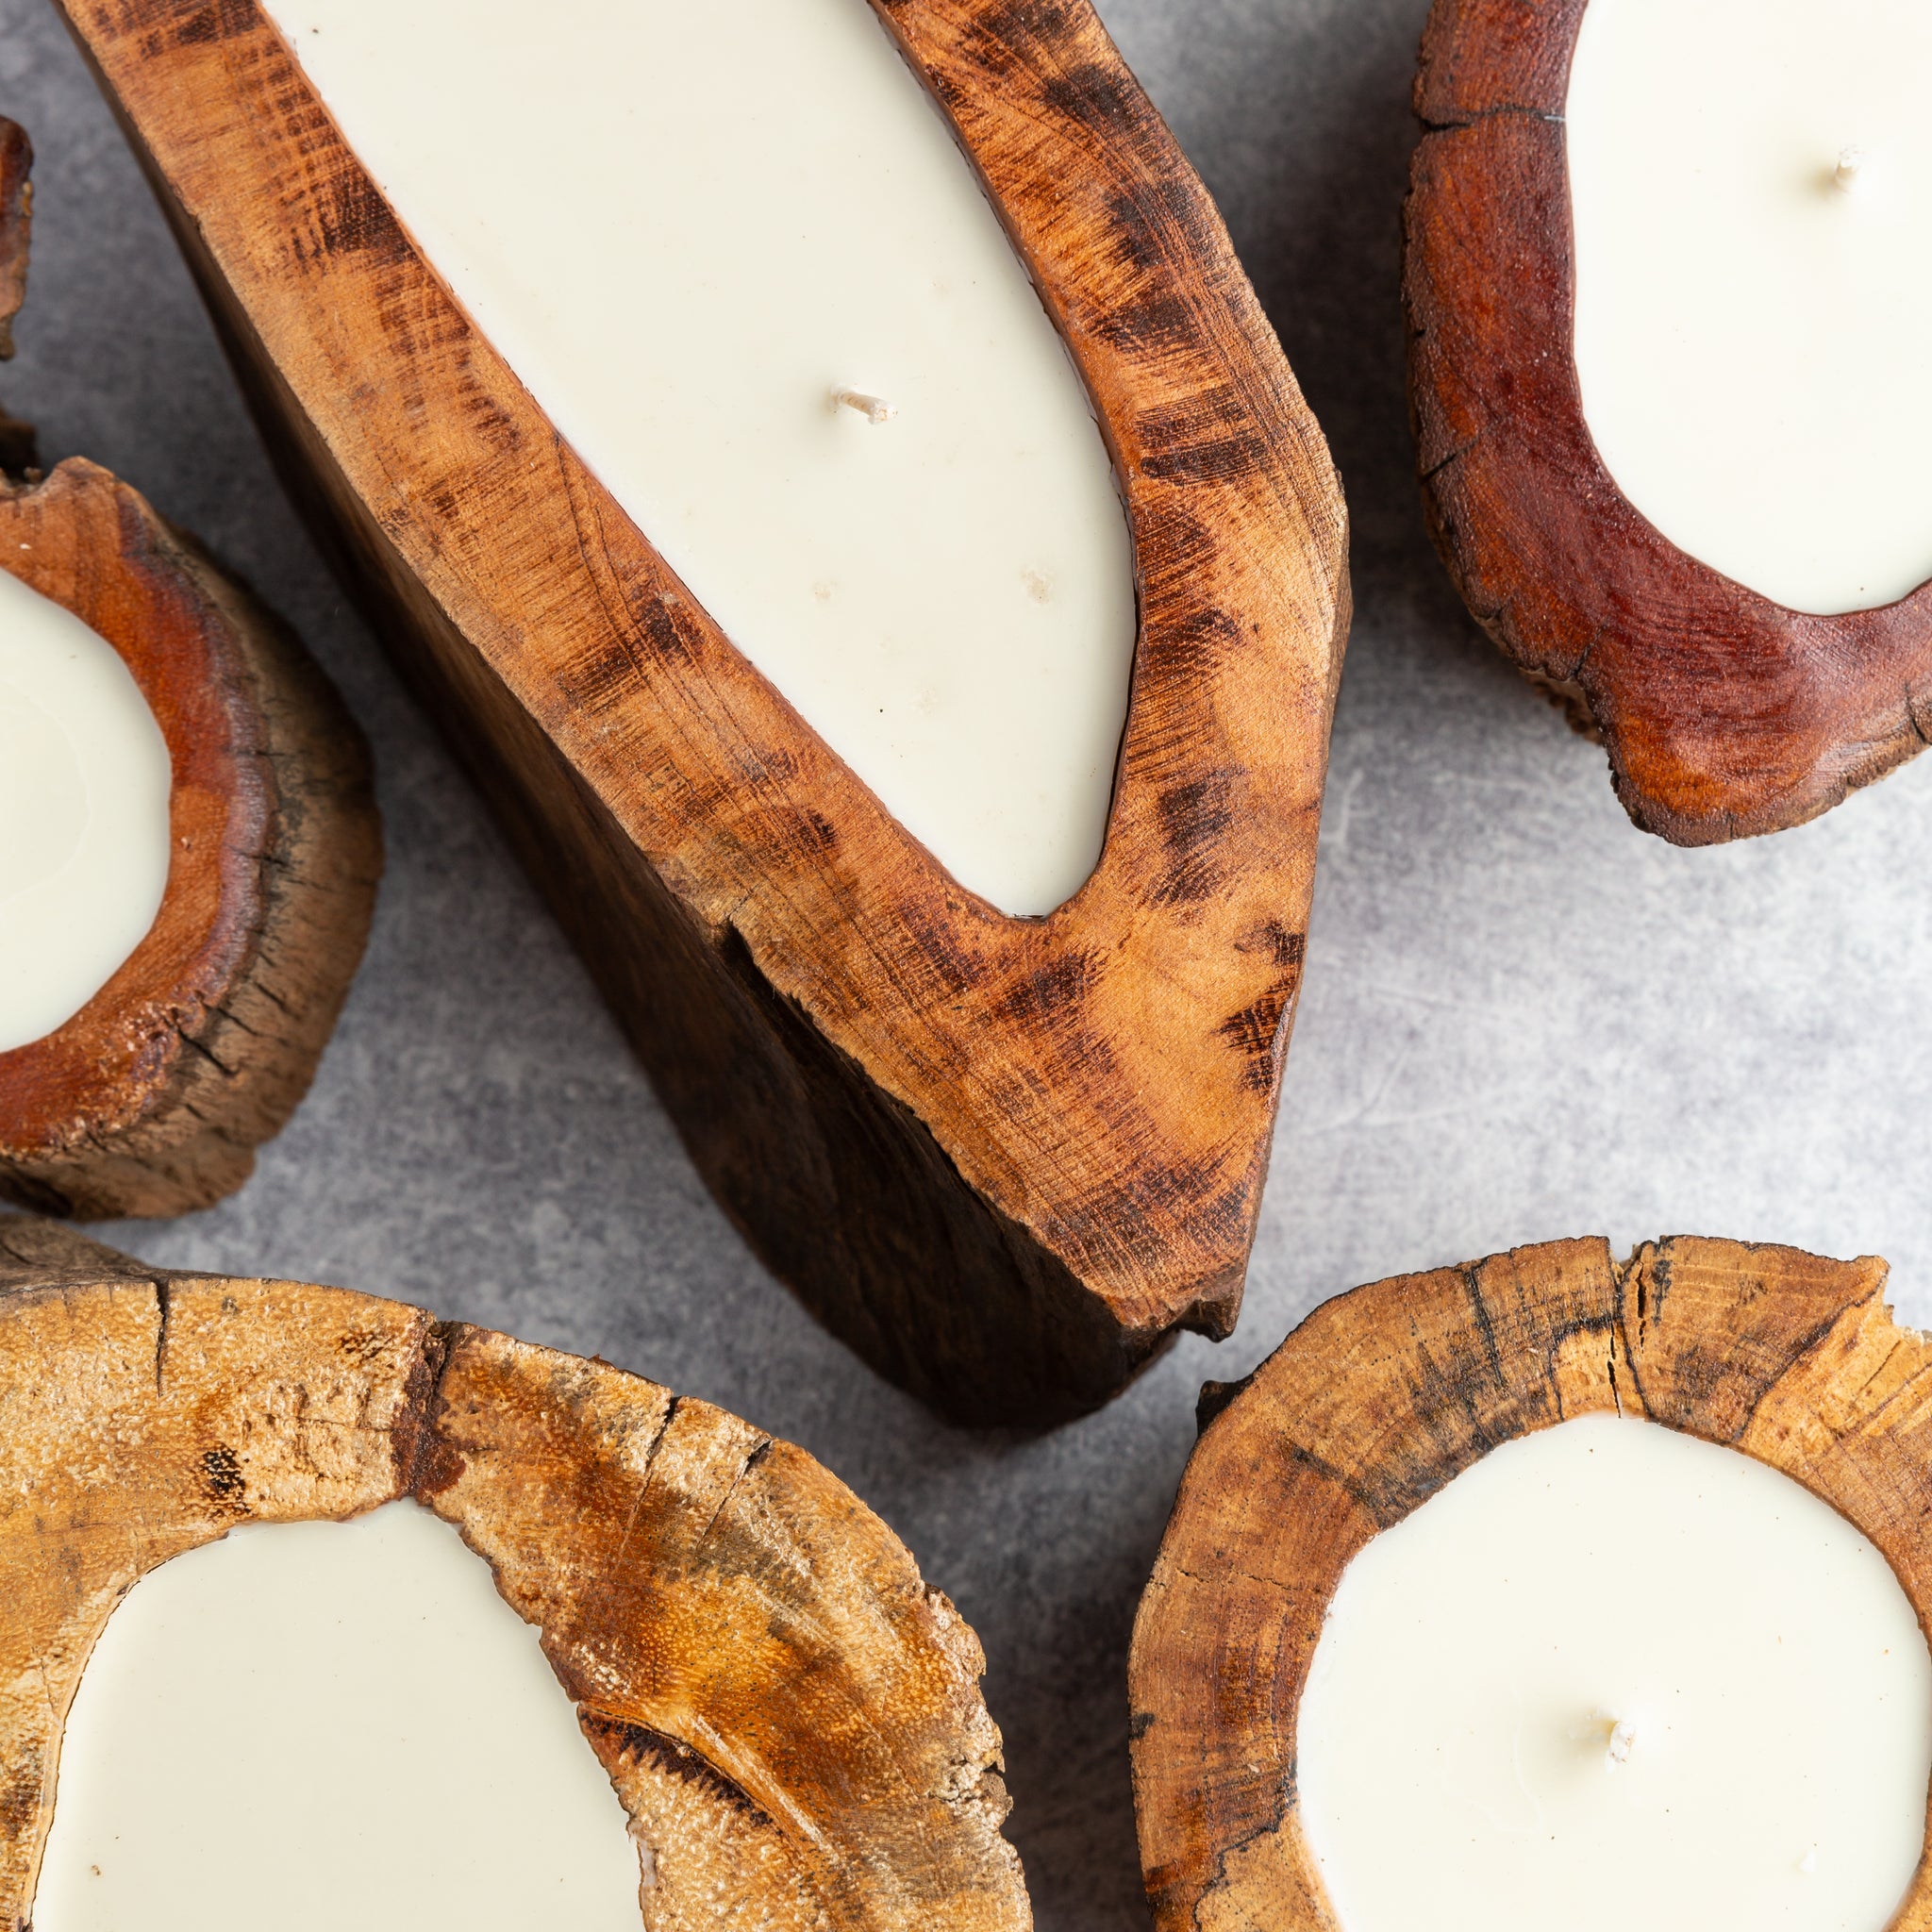 WOODEN LOG CANDLE - AROMAS THAT REACH THE SOUL